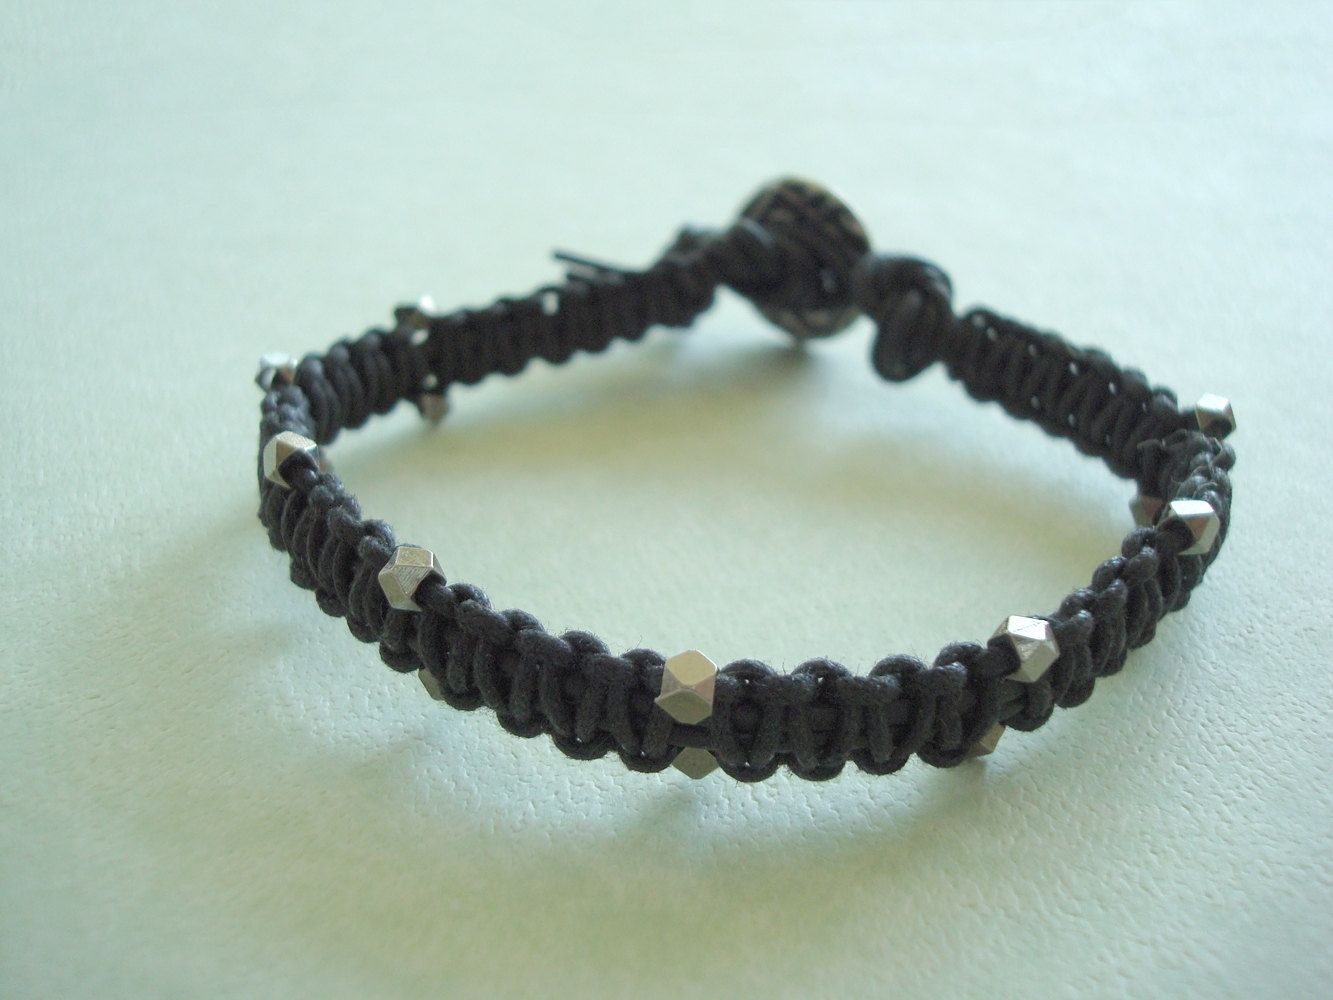 Buy a Hand Crafted Men's Macrame Bracelet With Genuine Leather ...